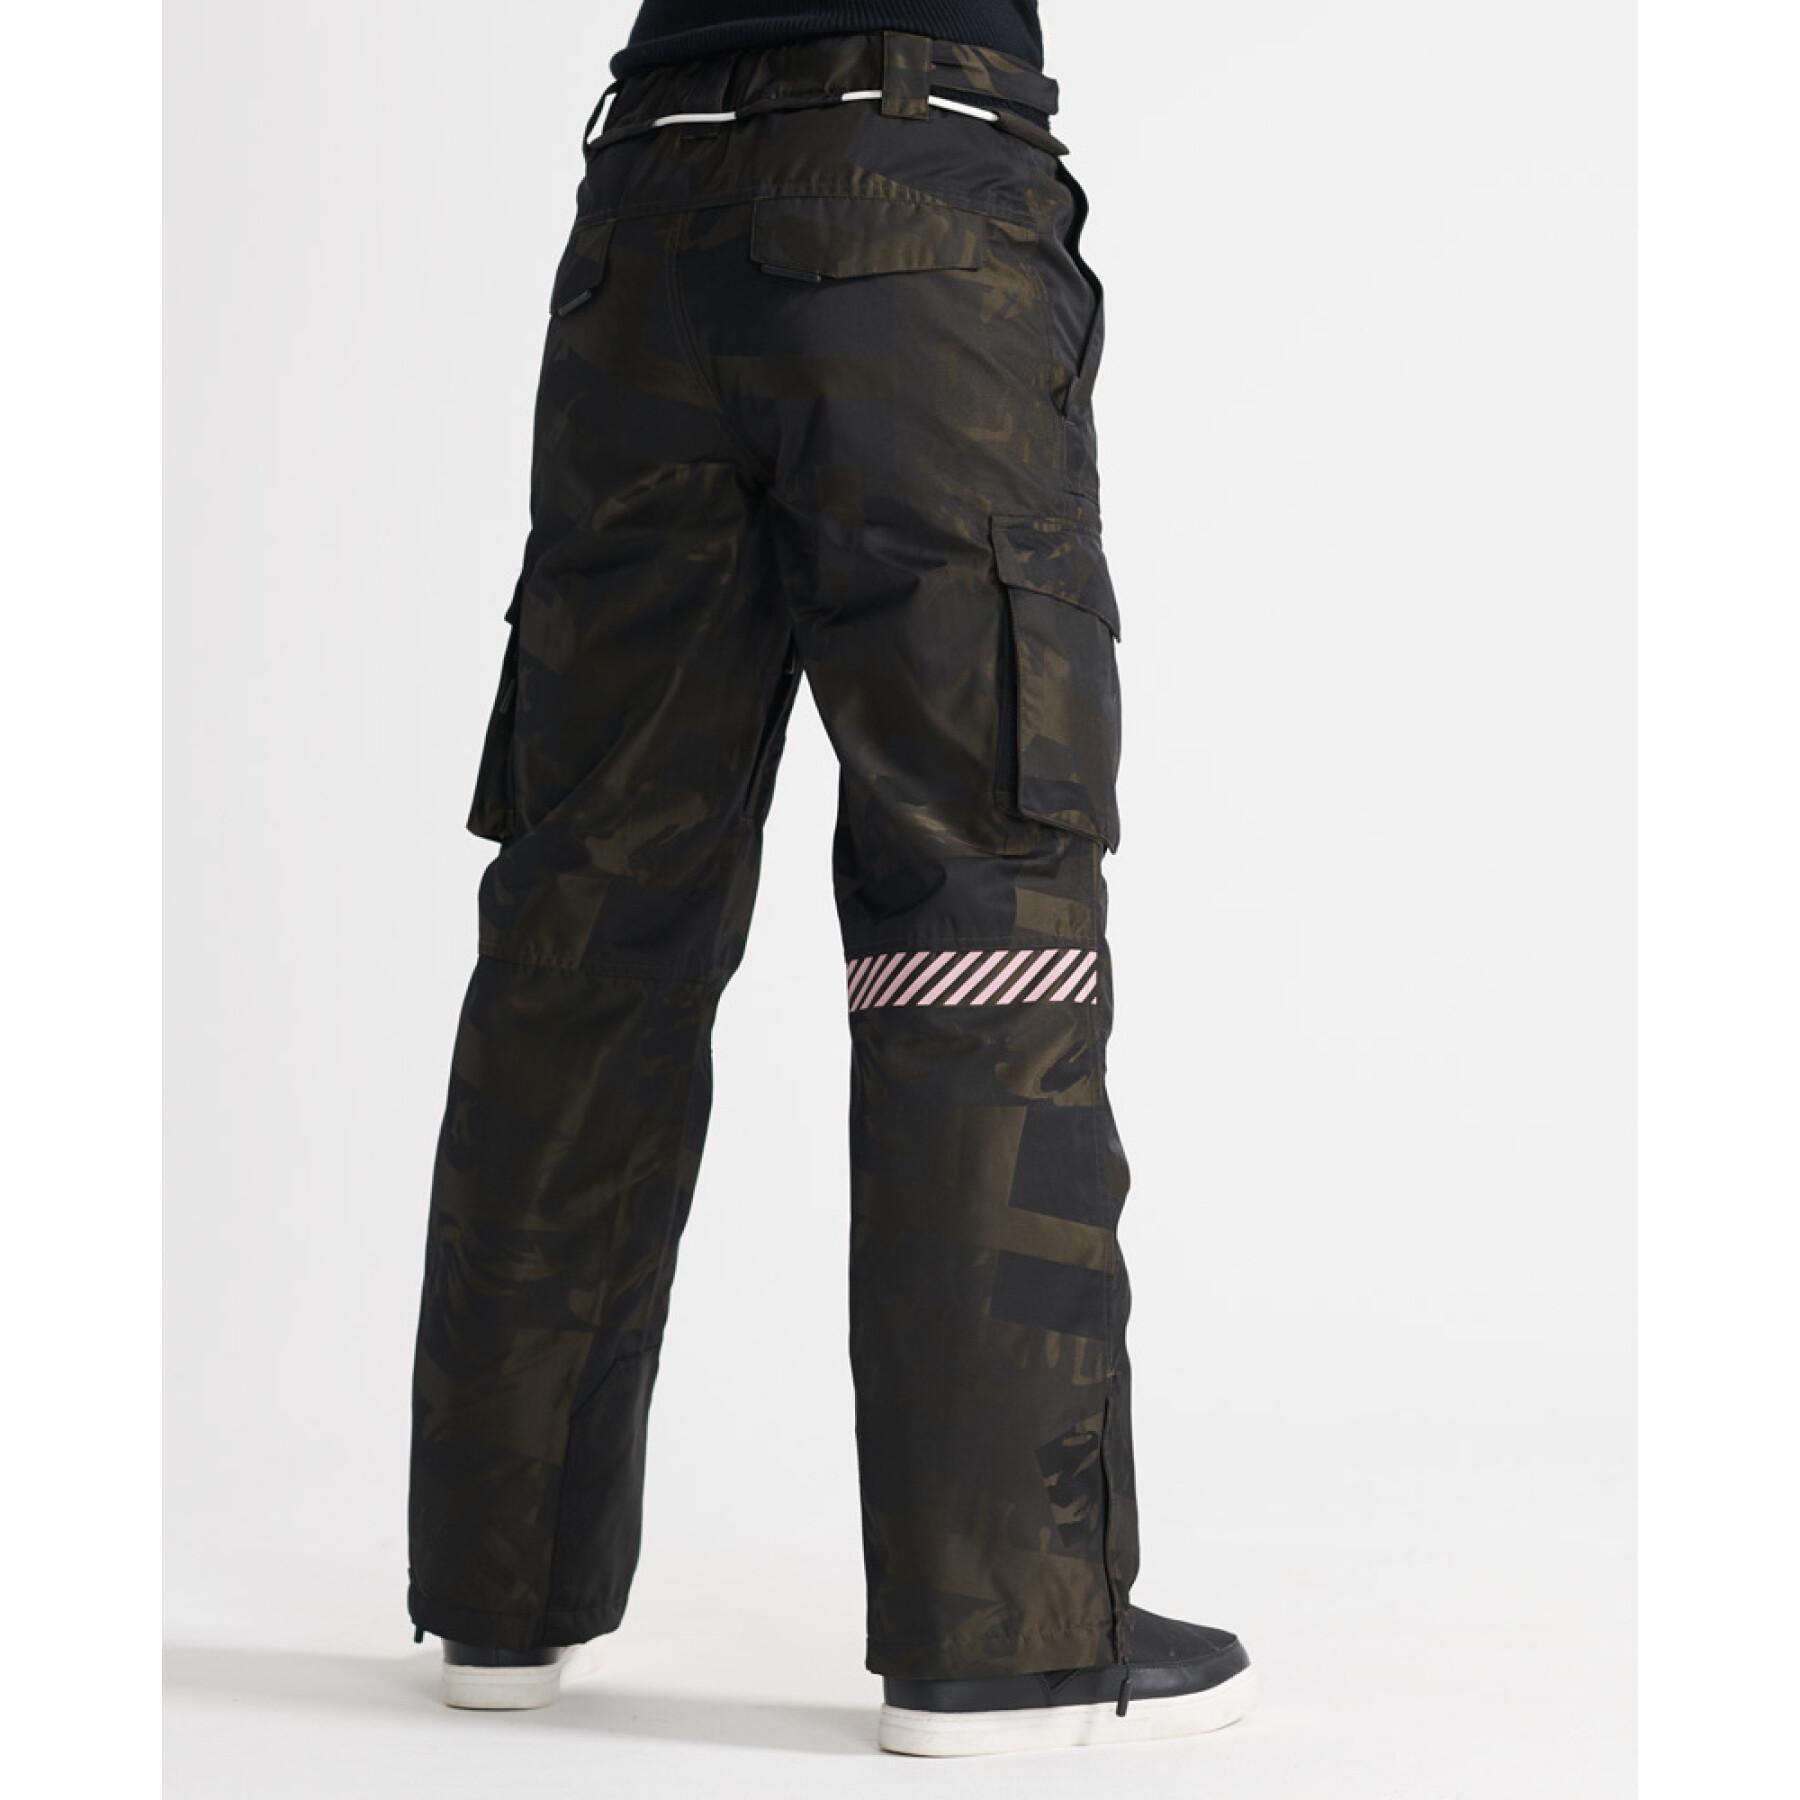 Women's cargo pants Superdry Freestyle